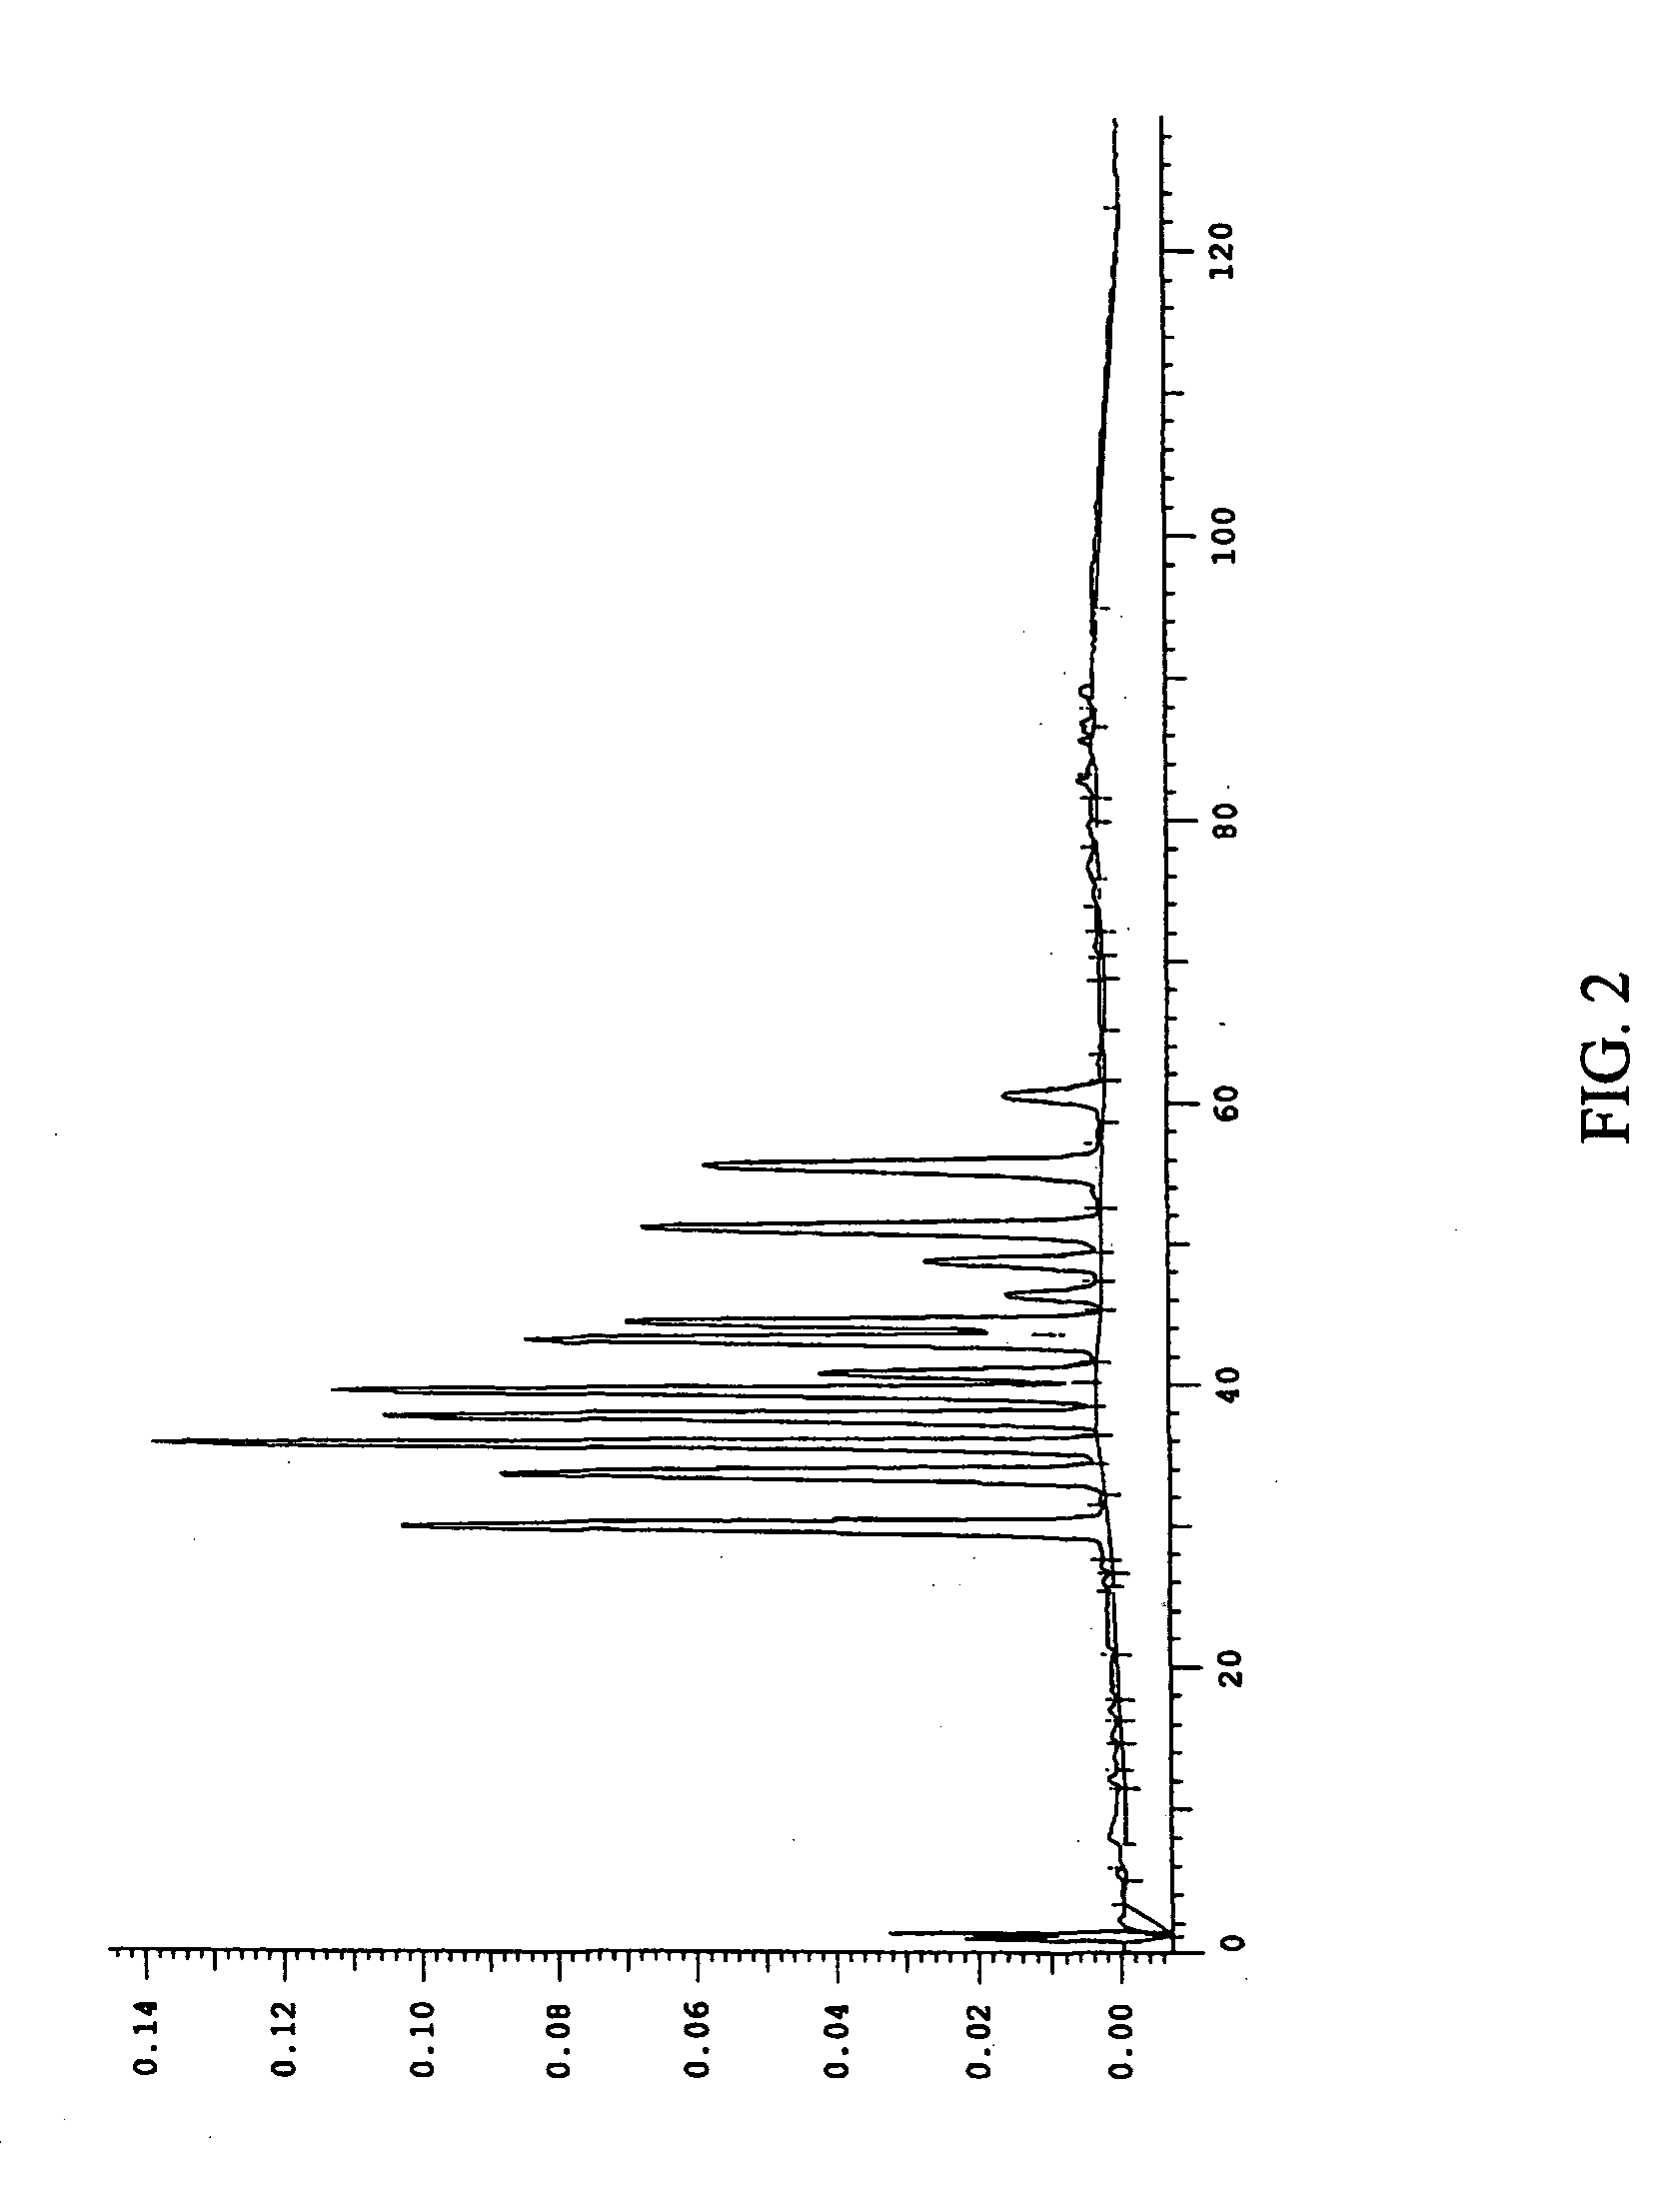 Efficient method for producing compositions enriched in total phenols